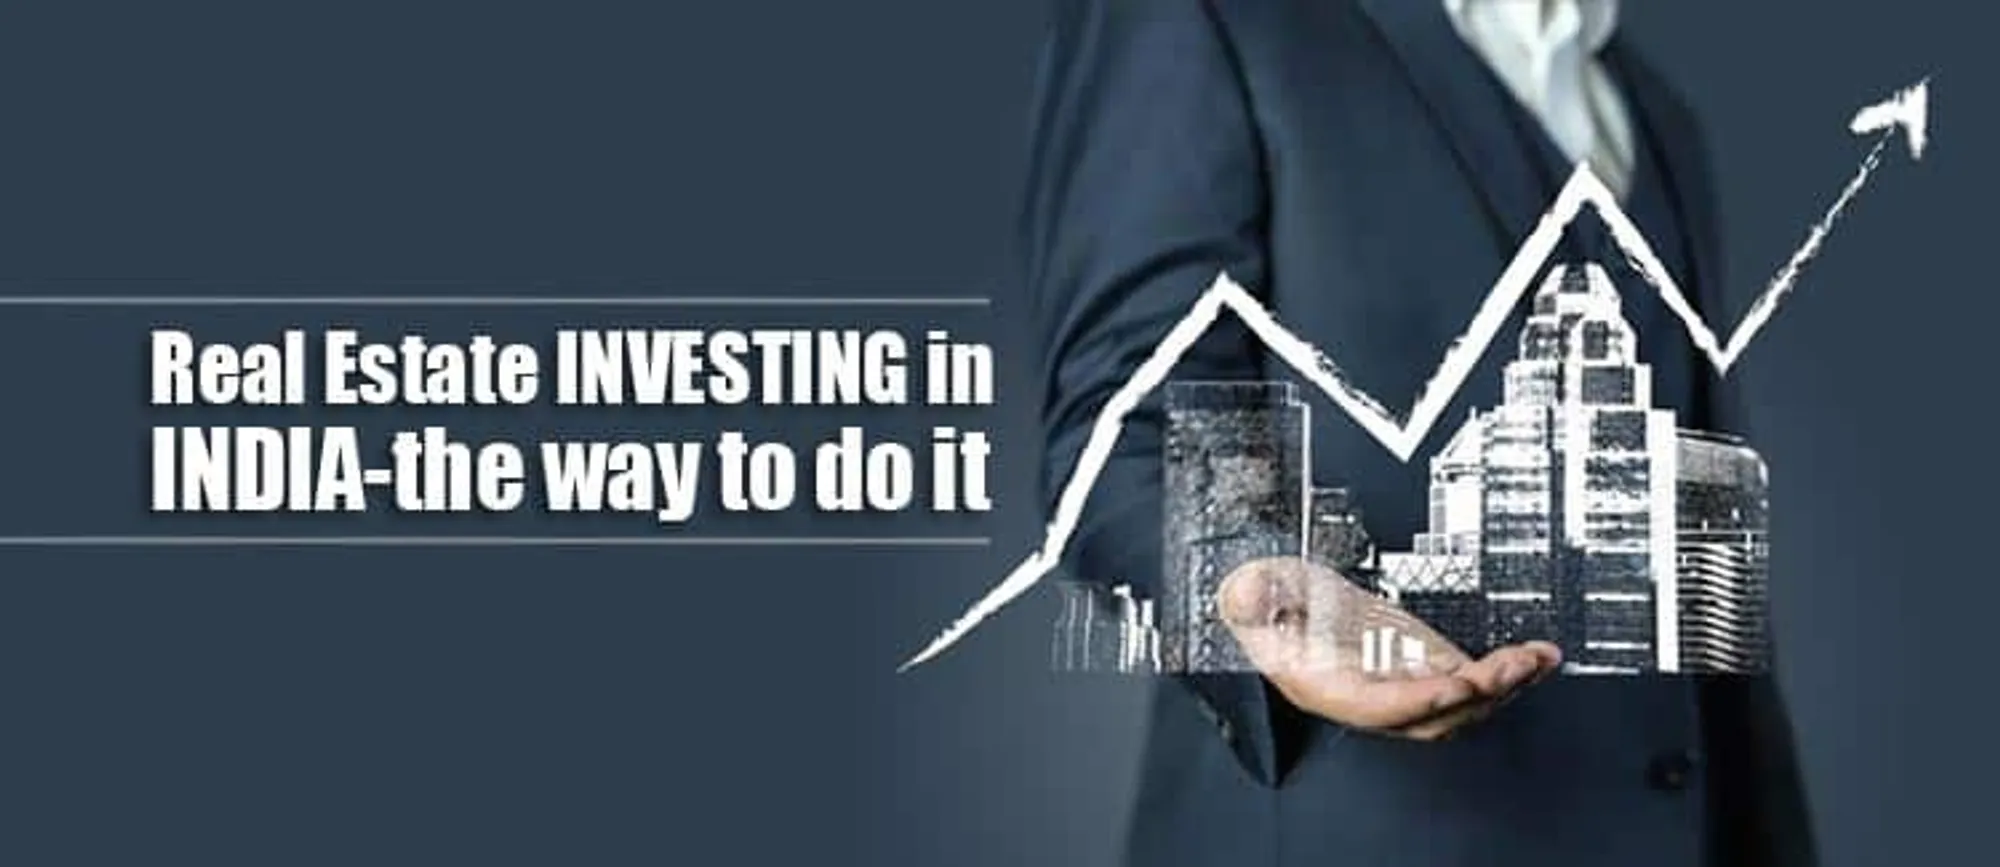 Real Estate Investing in India-the way to do it